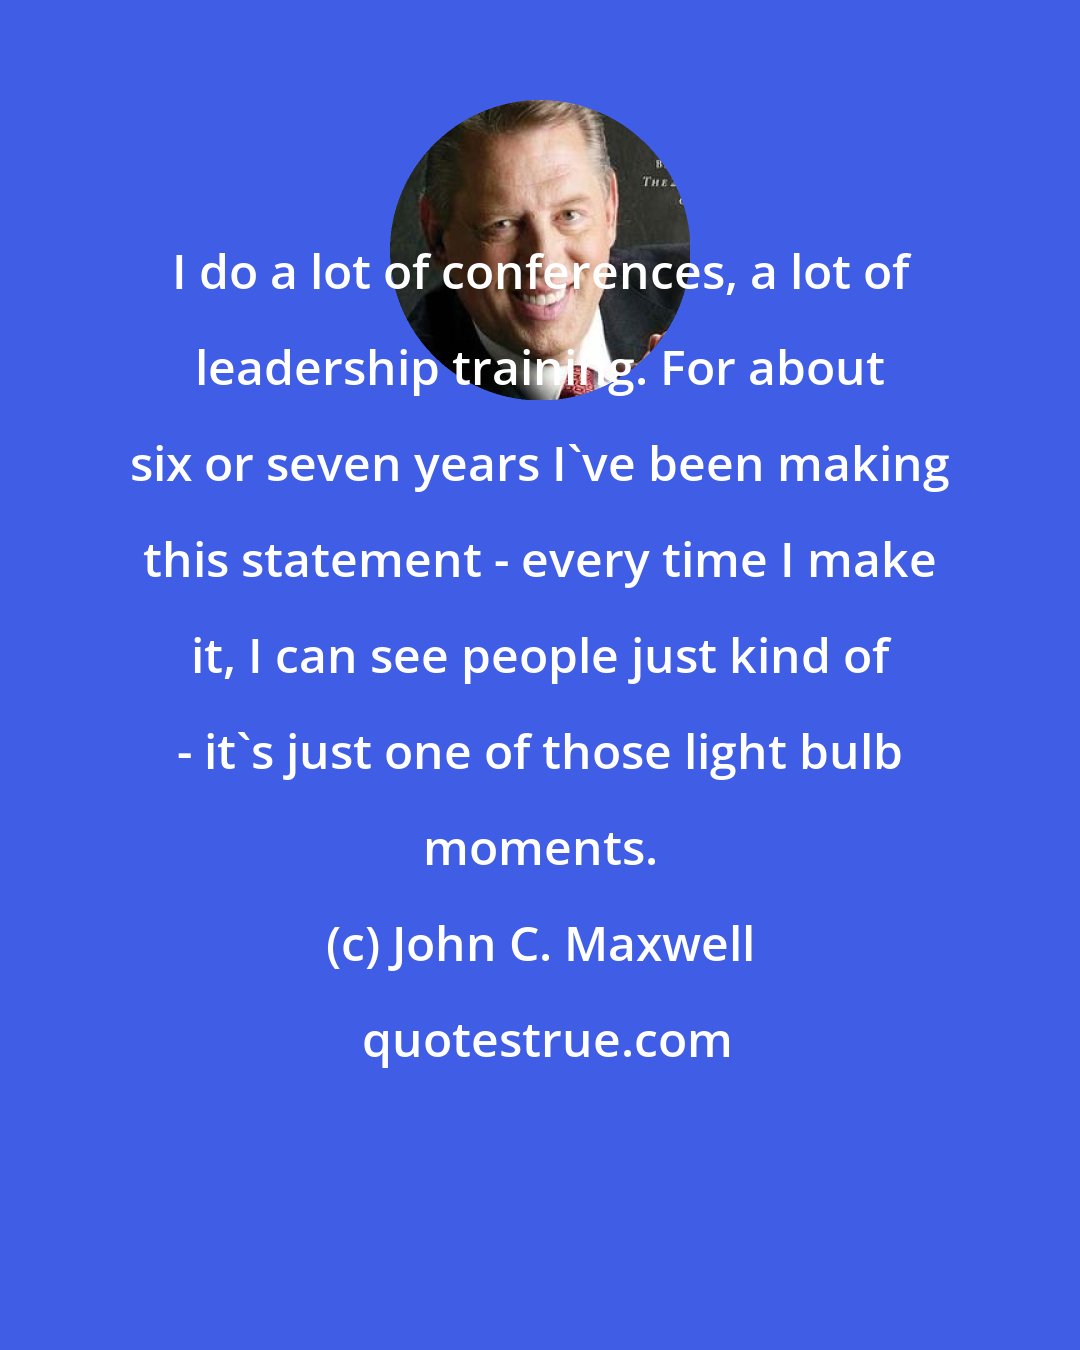 John C. Maxwell: I do a lot of conferences, a lot of leadership training. For about six or seven years I've been making this statement - every time I make it, I can see people just kind of - it's just one of those light bulb moments.